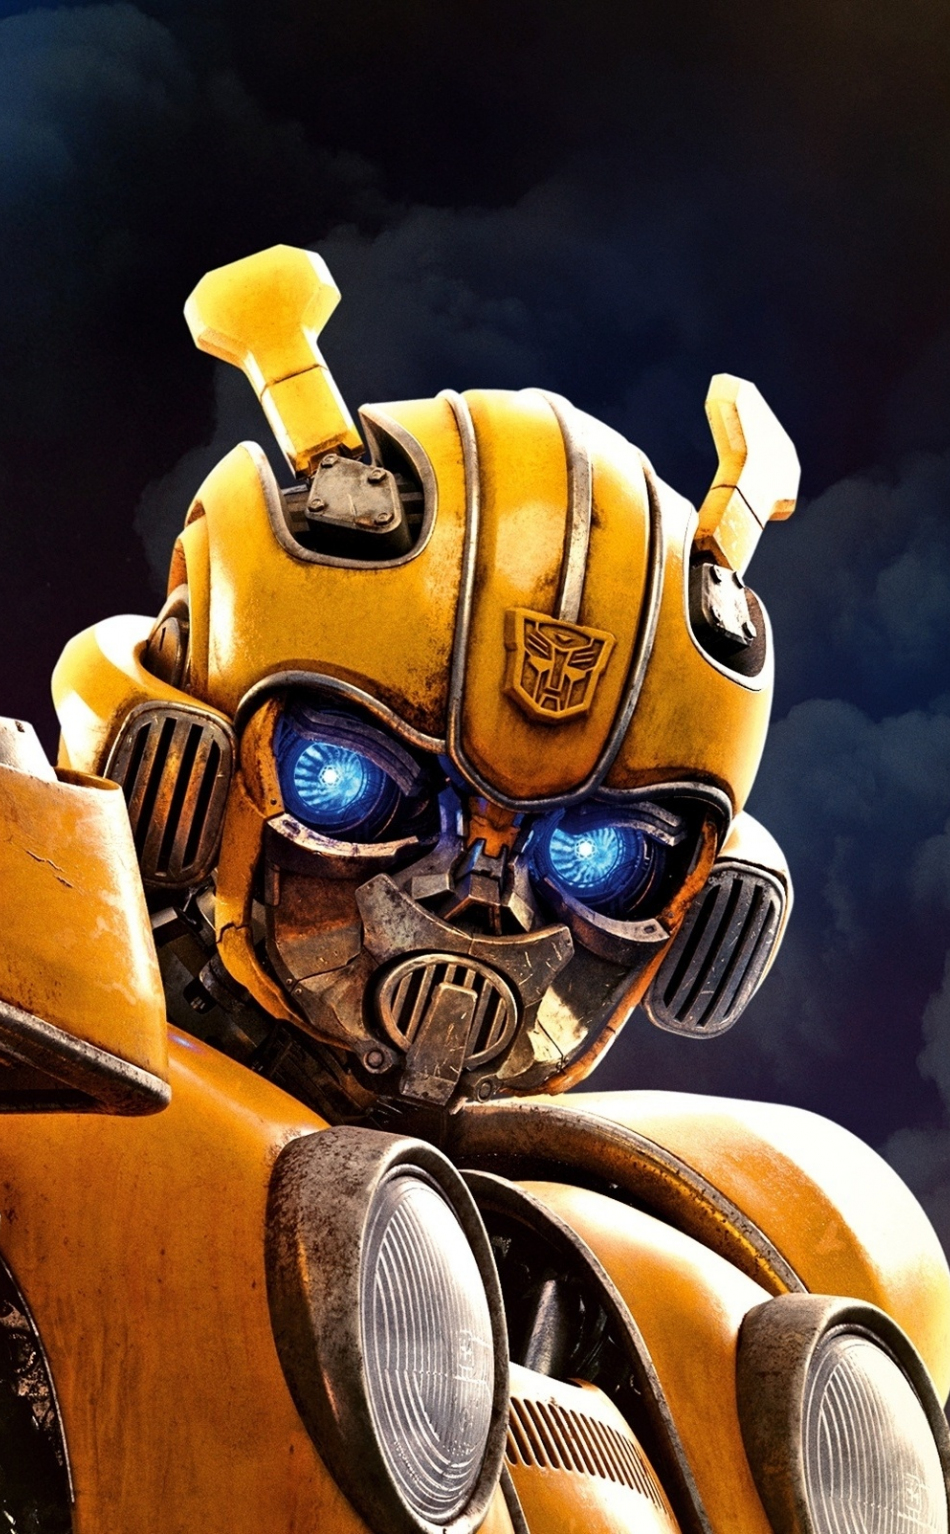 Download wallpaper 950x1534 bumblebee, transformers, 2018 movie, iphone,  950x1534 hd background, 15248